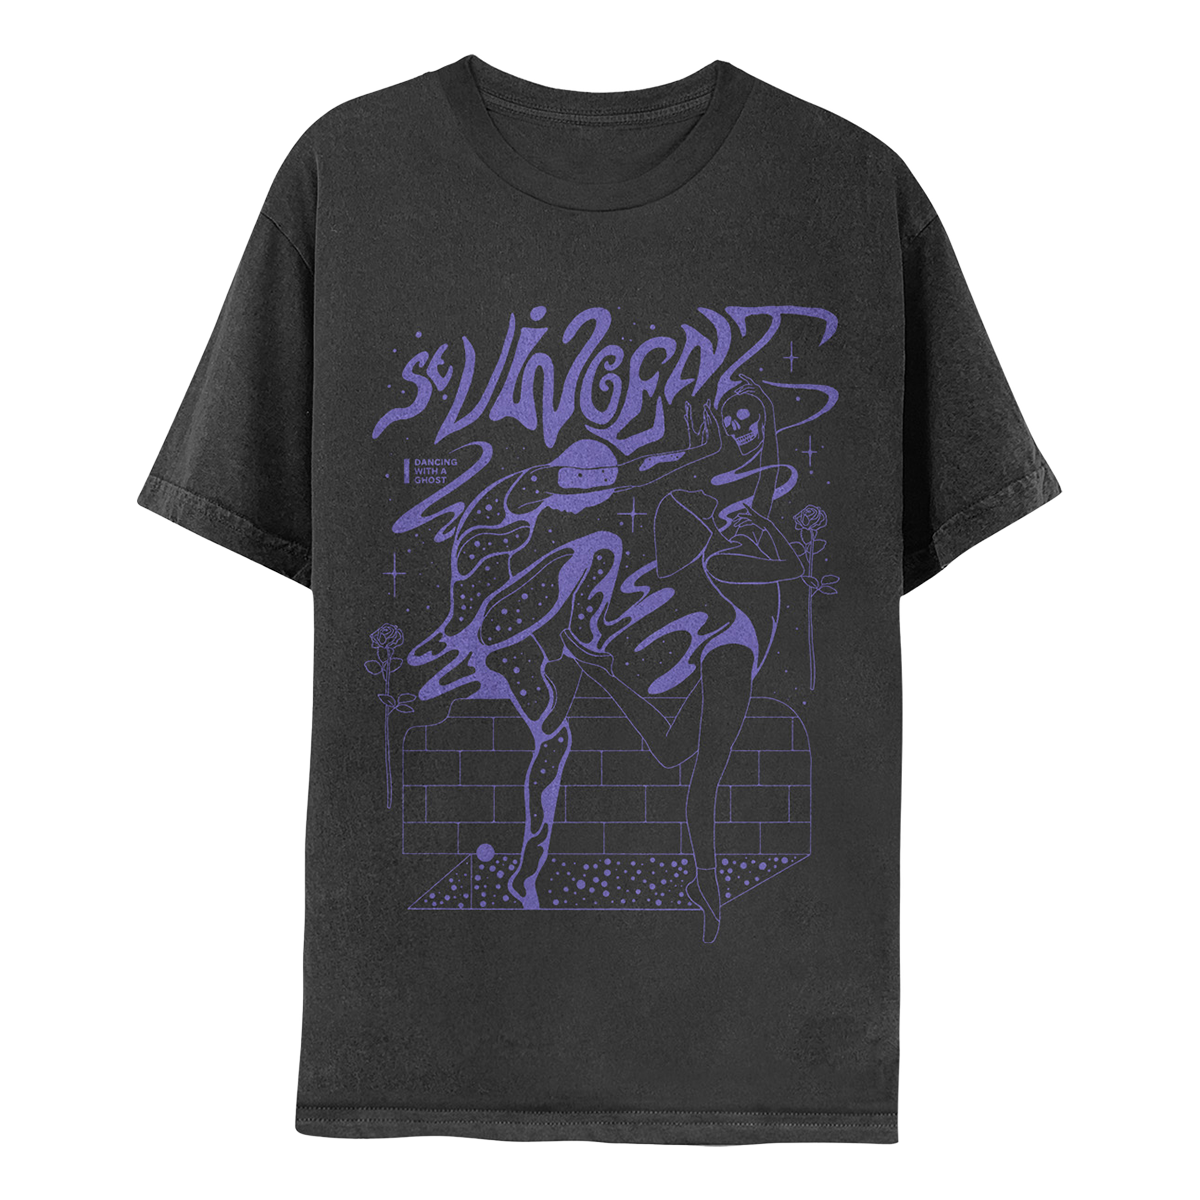 Dancing With A Ghost Tee – Black